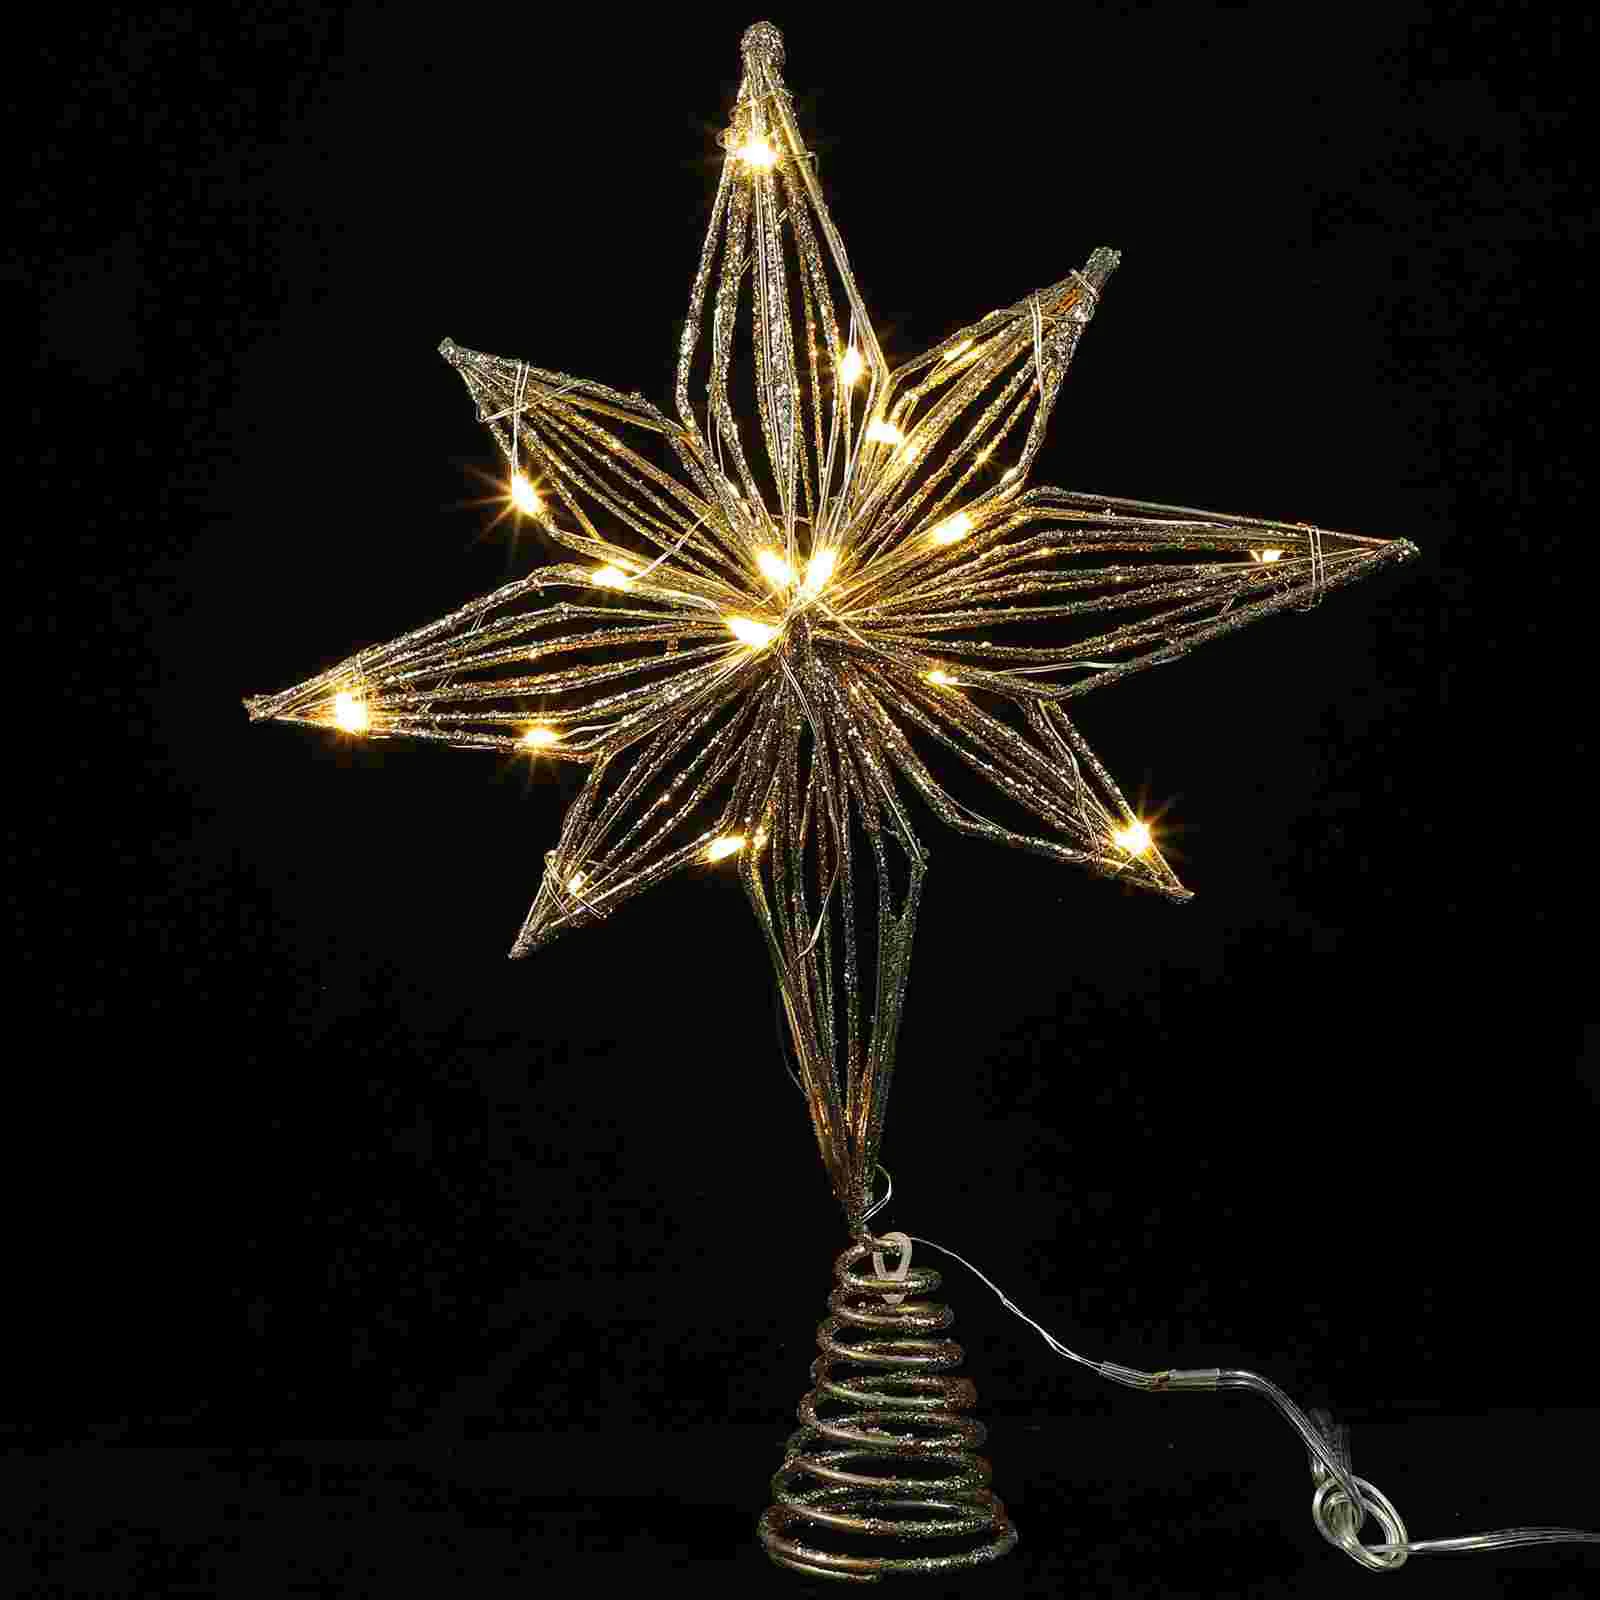 

Ornament Christmas Tree Top Star Light up Lighted Topper Xmas Treetop LED Decoration